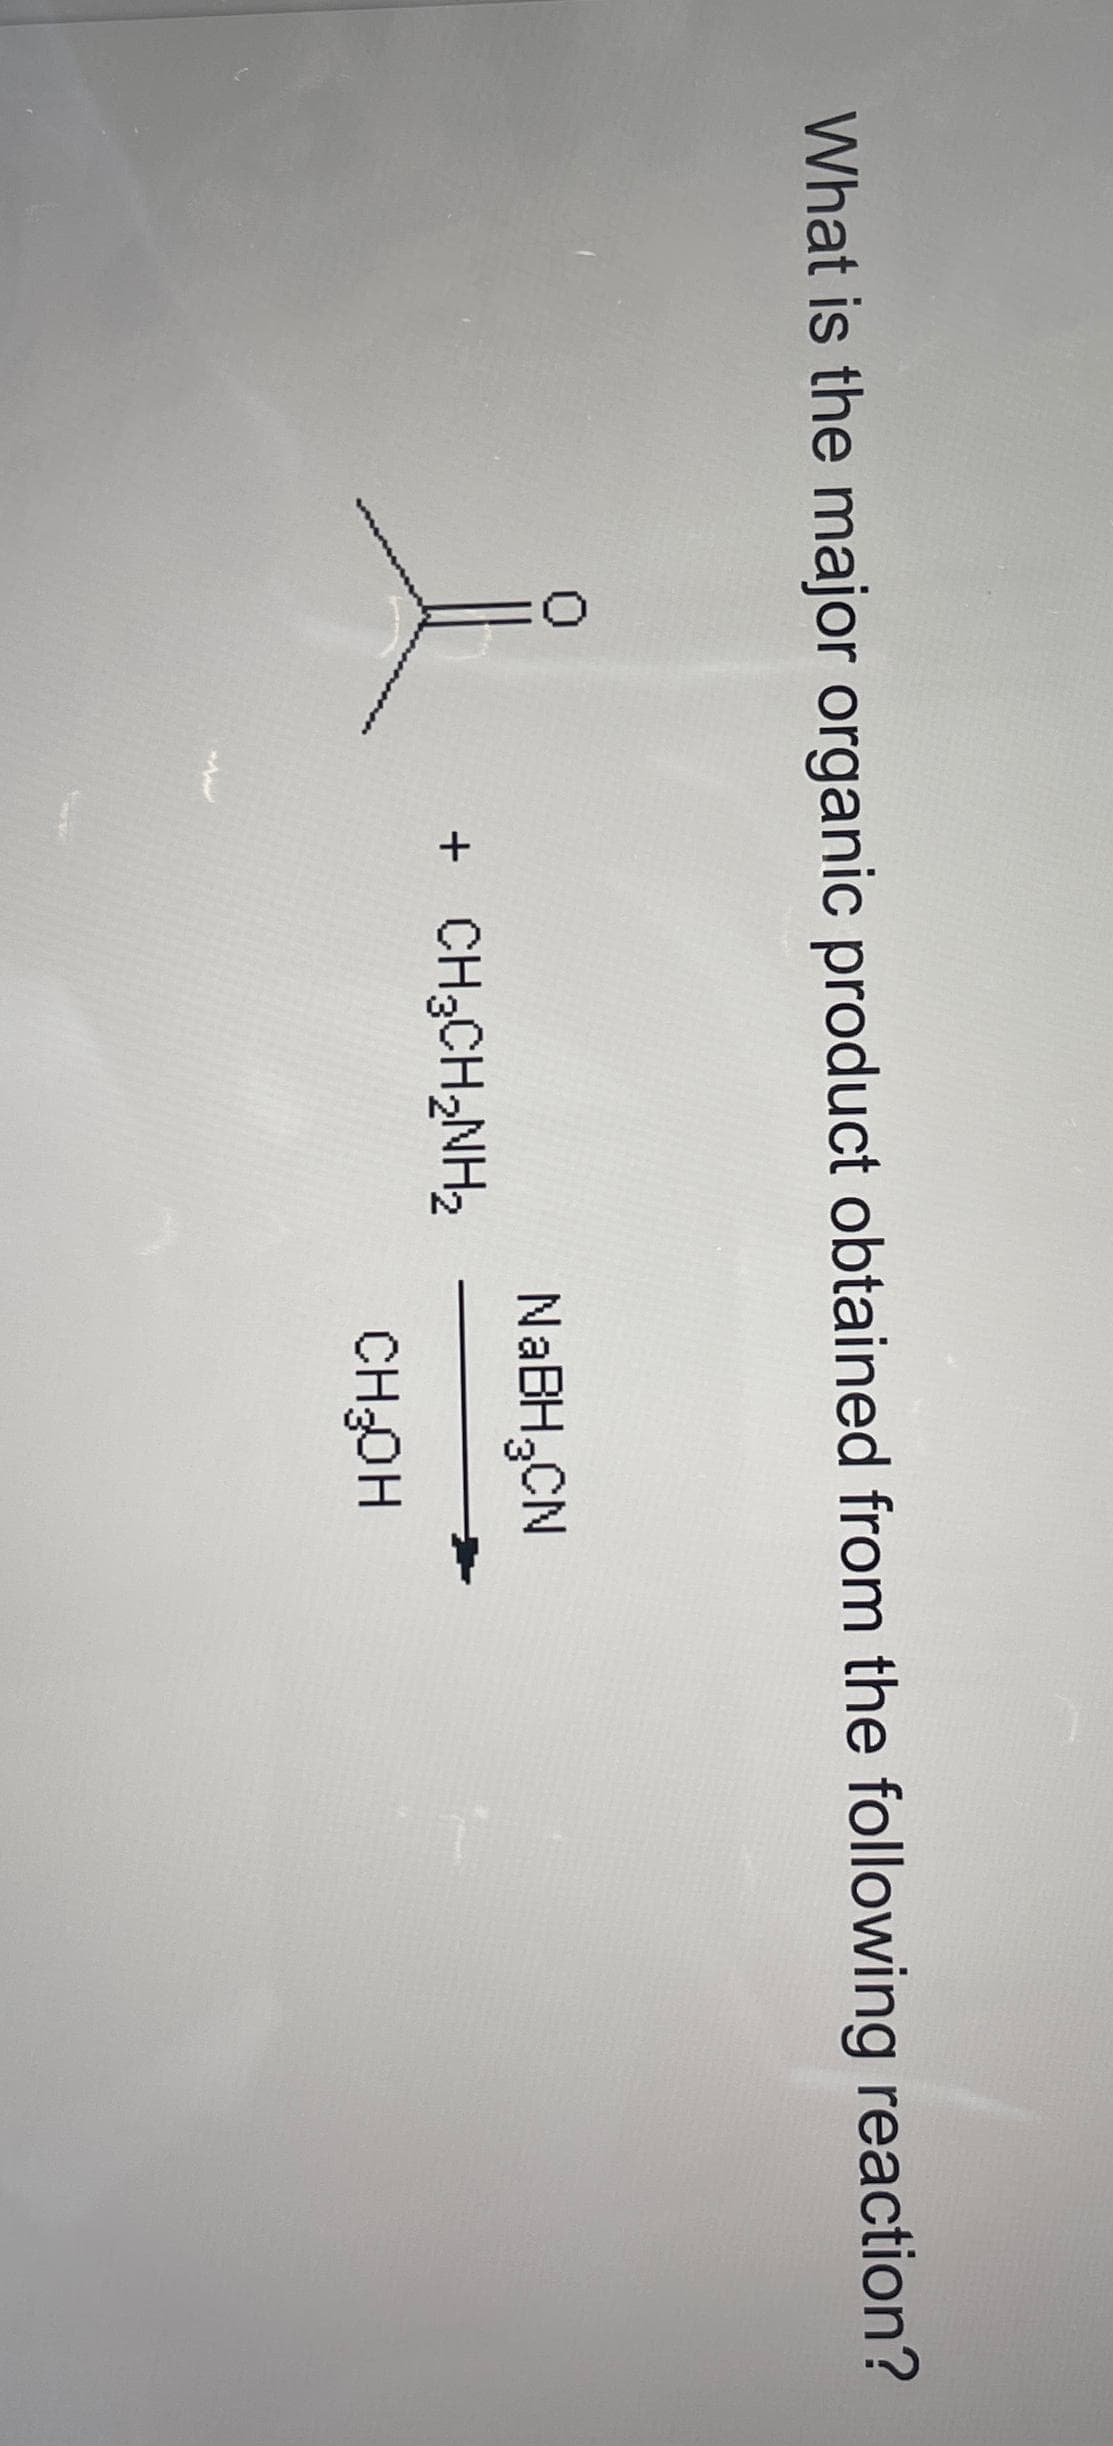 What is the major organic product obtained from the following reaction?
i
+ CH3CH2NH2
NaBH₂CN
CH₂OH